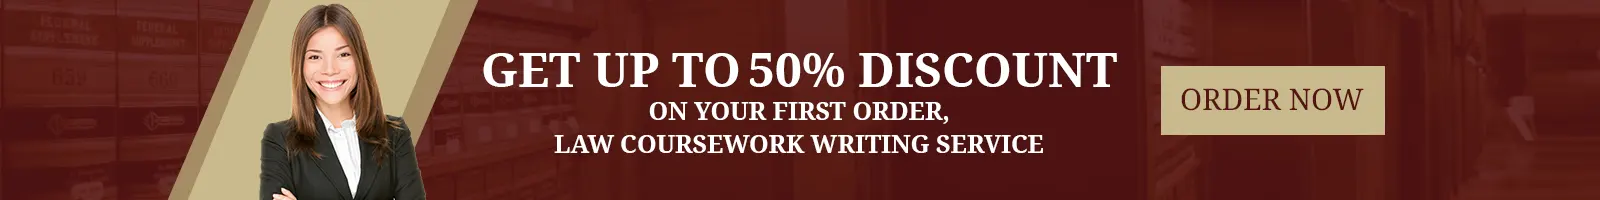 Law coursework writing services